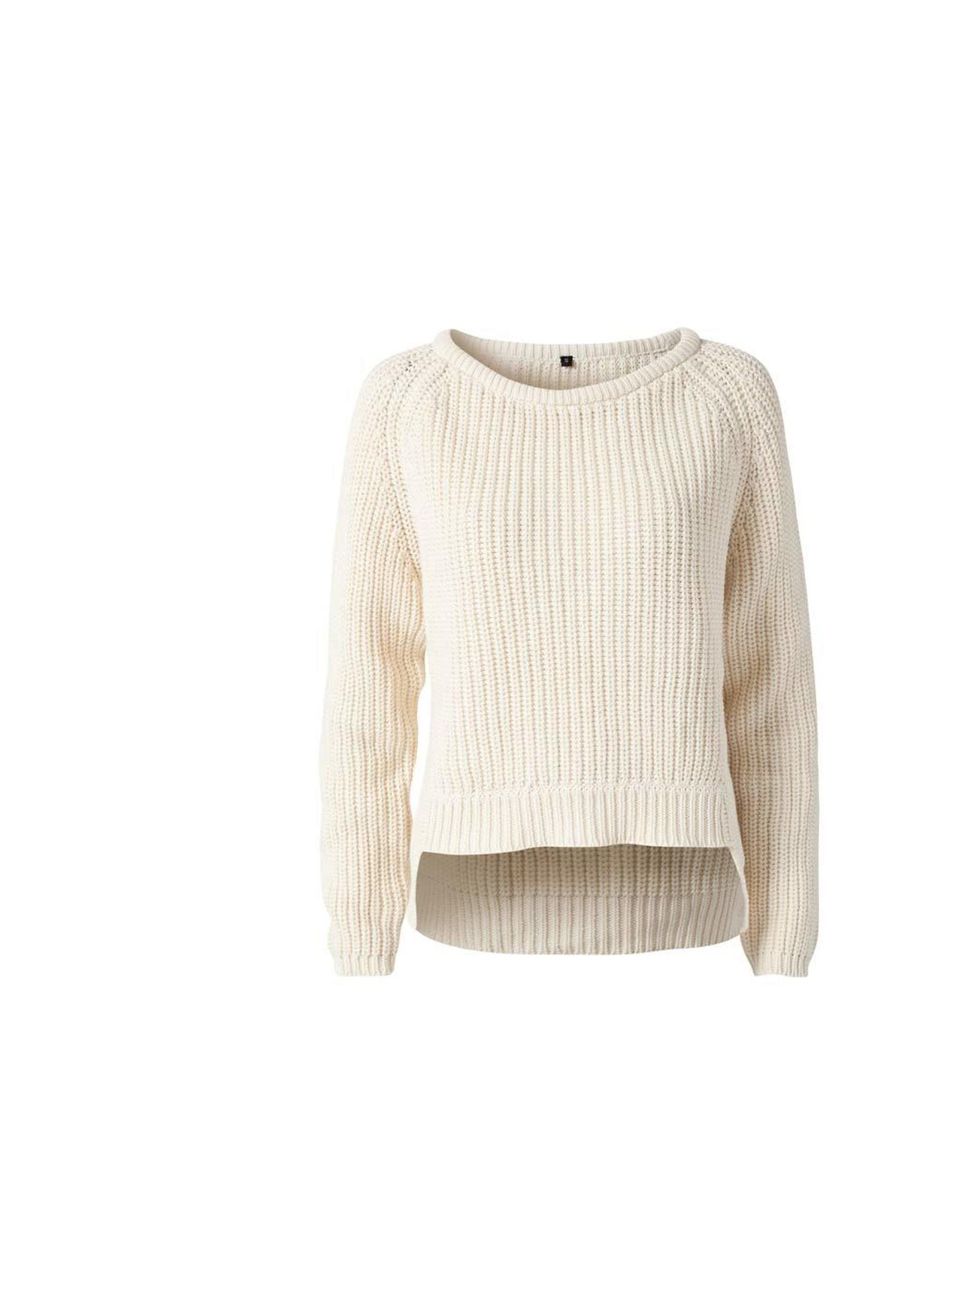 <p>Fashion Assistant Sarah Bonser will wear this cream chunky knit with leather shorts - perfect for summer evenings.</p><p>Issue 1.3 sweater, £39.95 at <a href="http://nelly.com/uk/womens-fashion/clothing/jumpers-cardigans/issue-13-2260/lou-sweater-10137